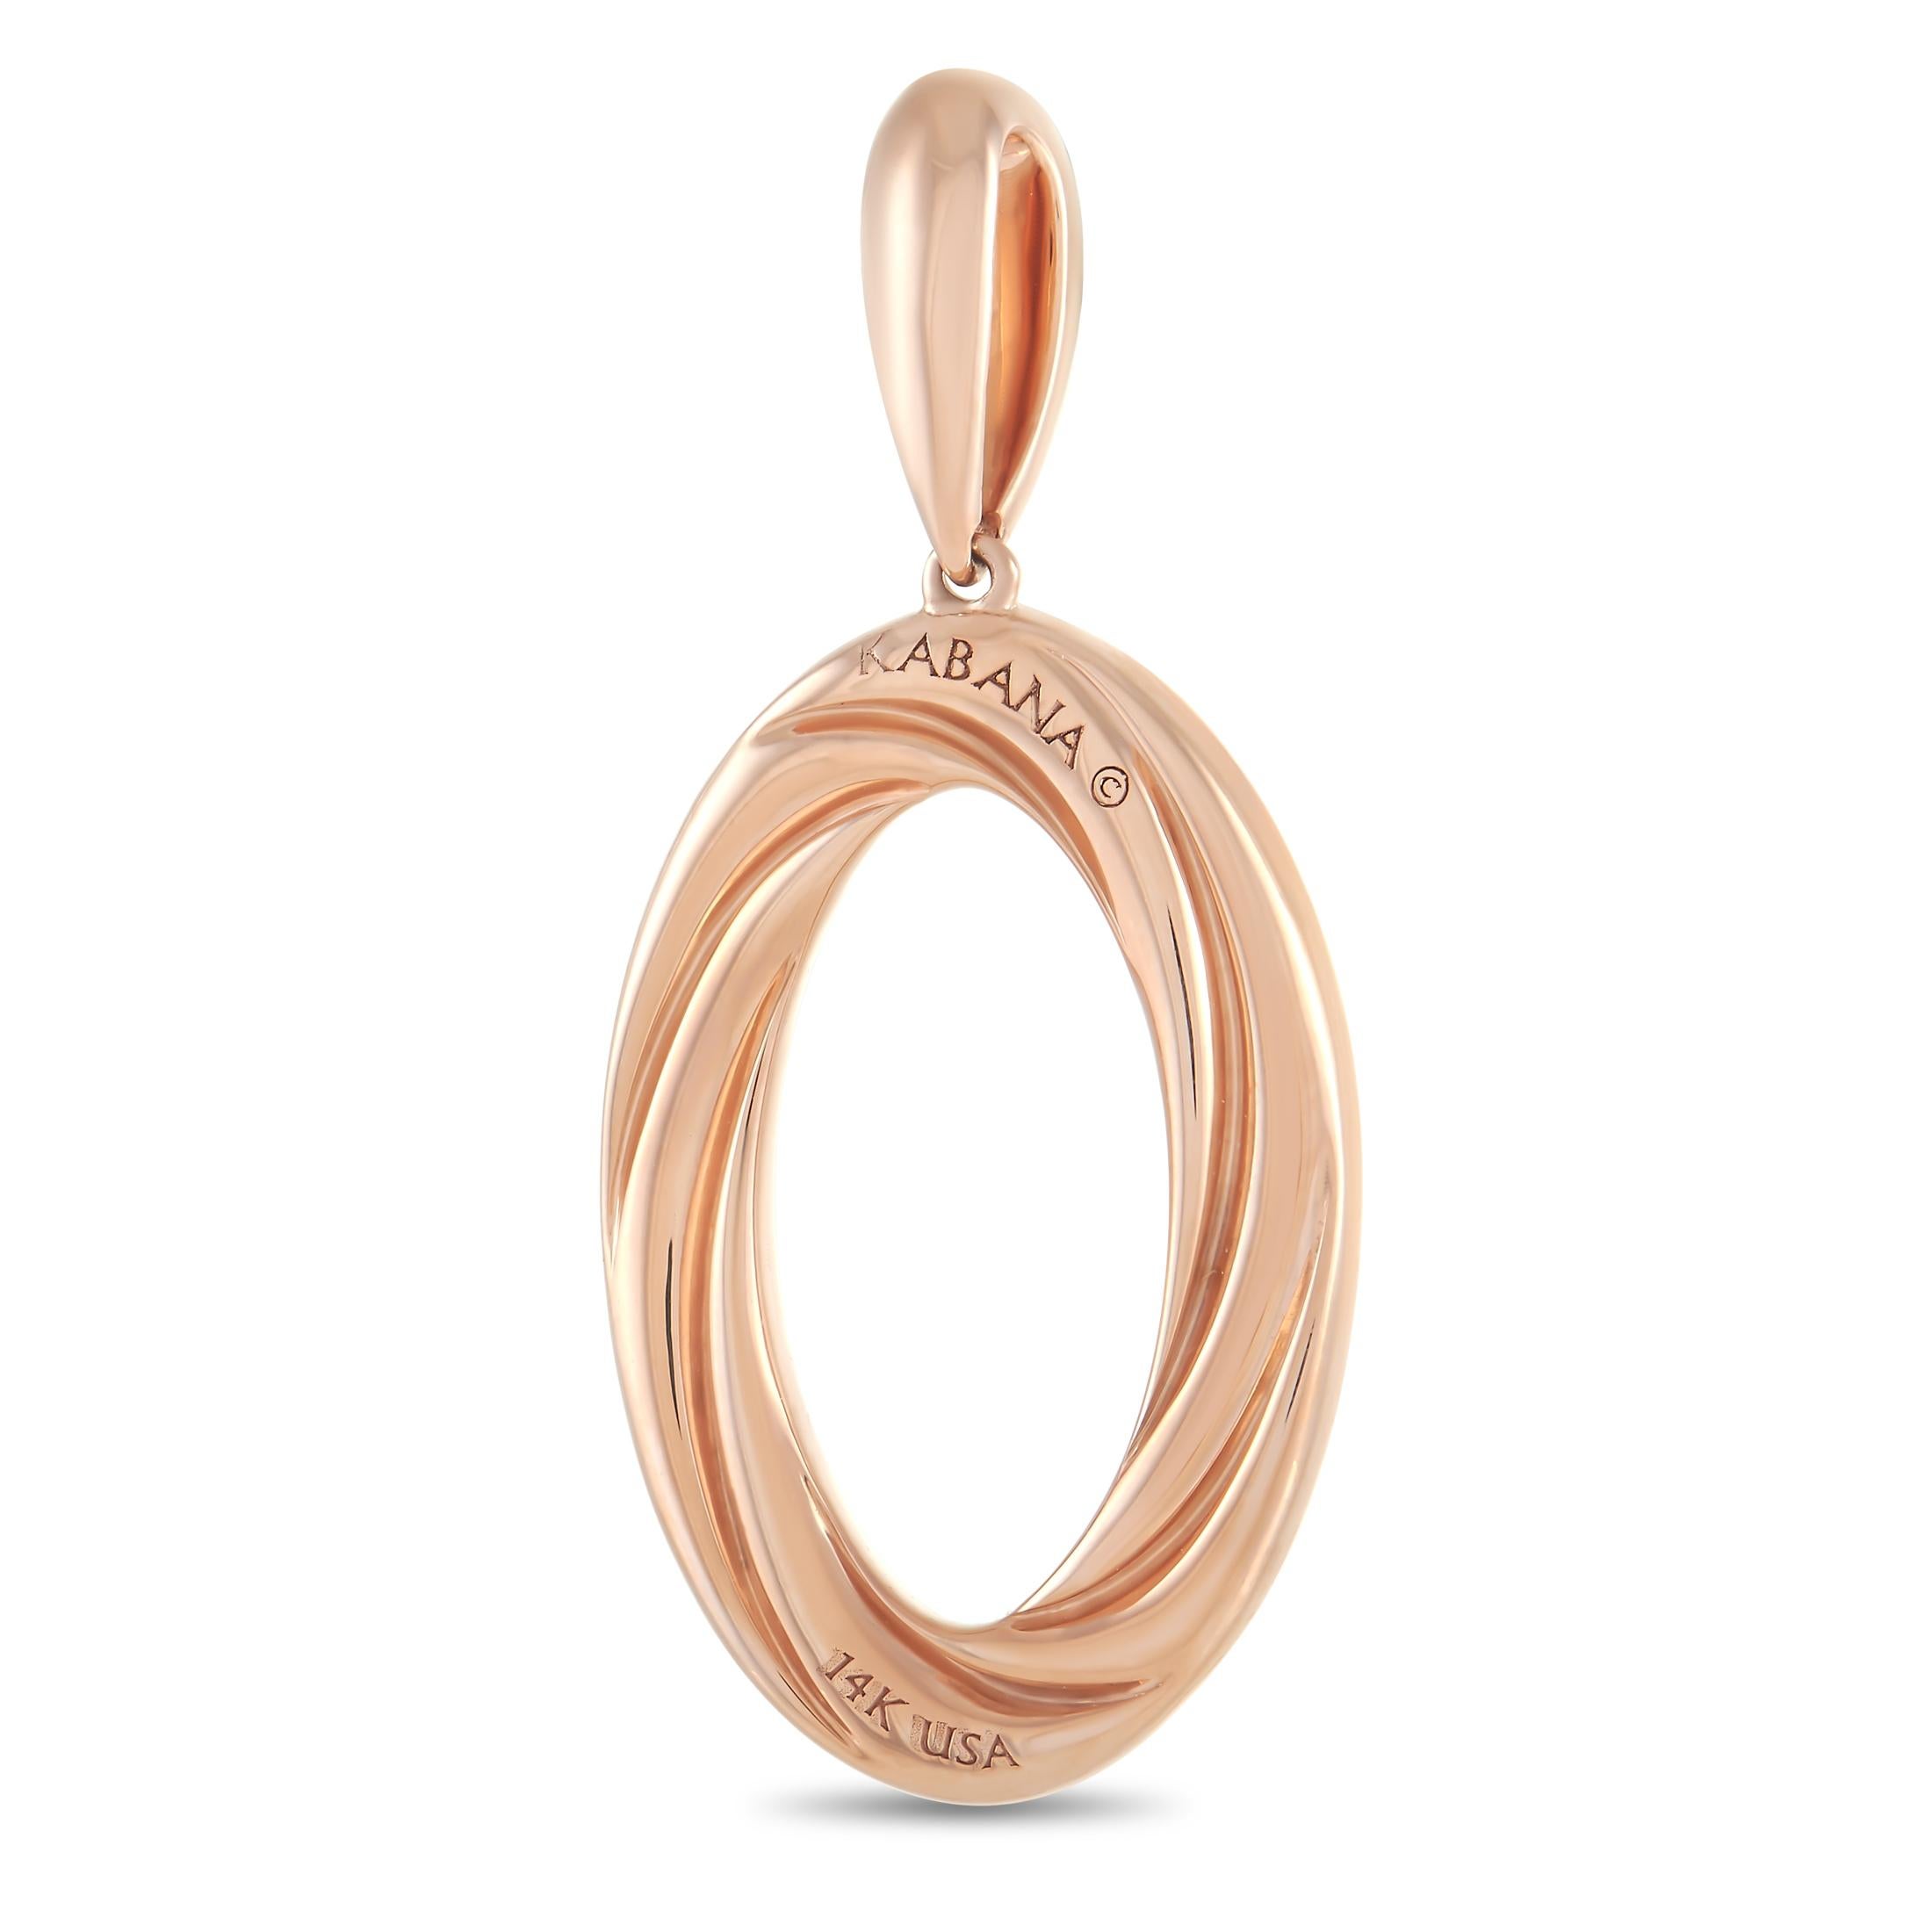 Gracefully curved lines give this elegant Kabana pendant a stylish sense of movement. A 14K Rose Gold setting provides the perfect backdrop for Mother of Pearl accents and diamonds with a total weight of 0.25 carats. It measures 1.63” long, .75”